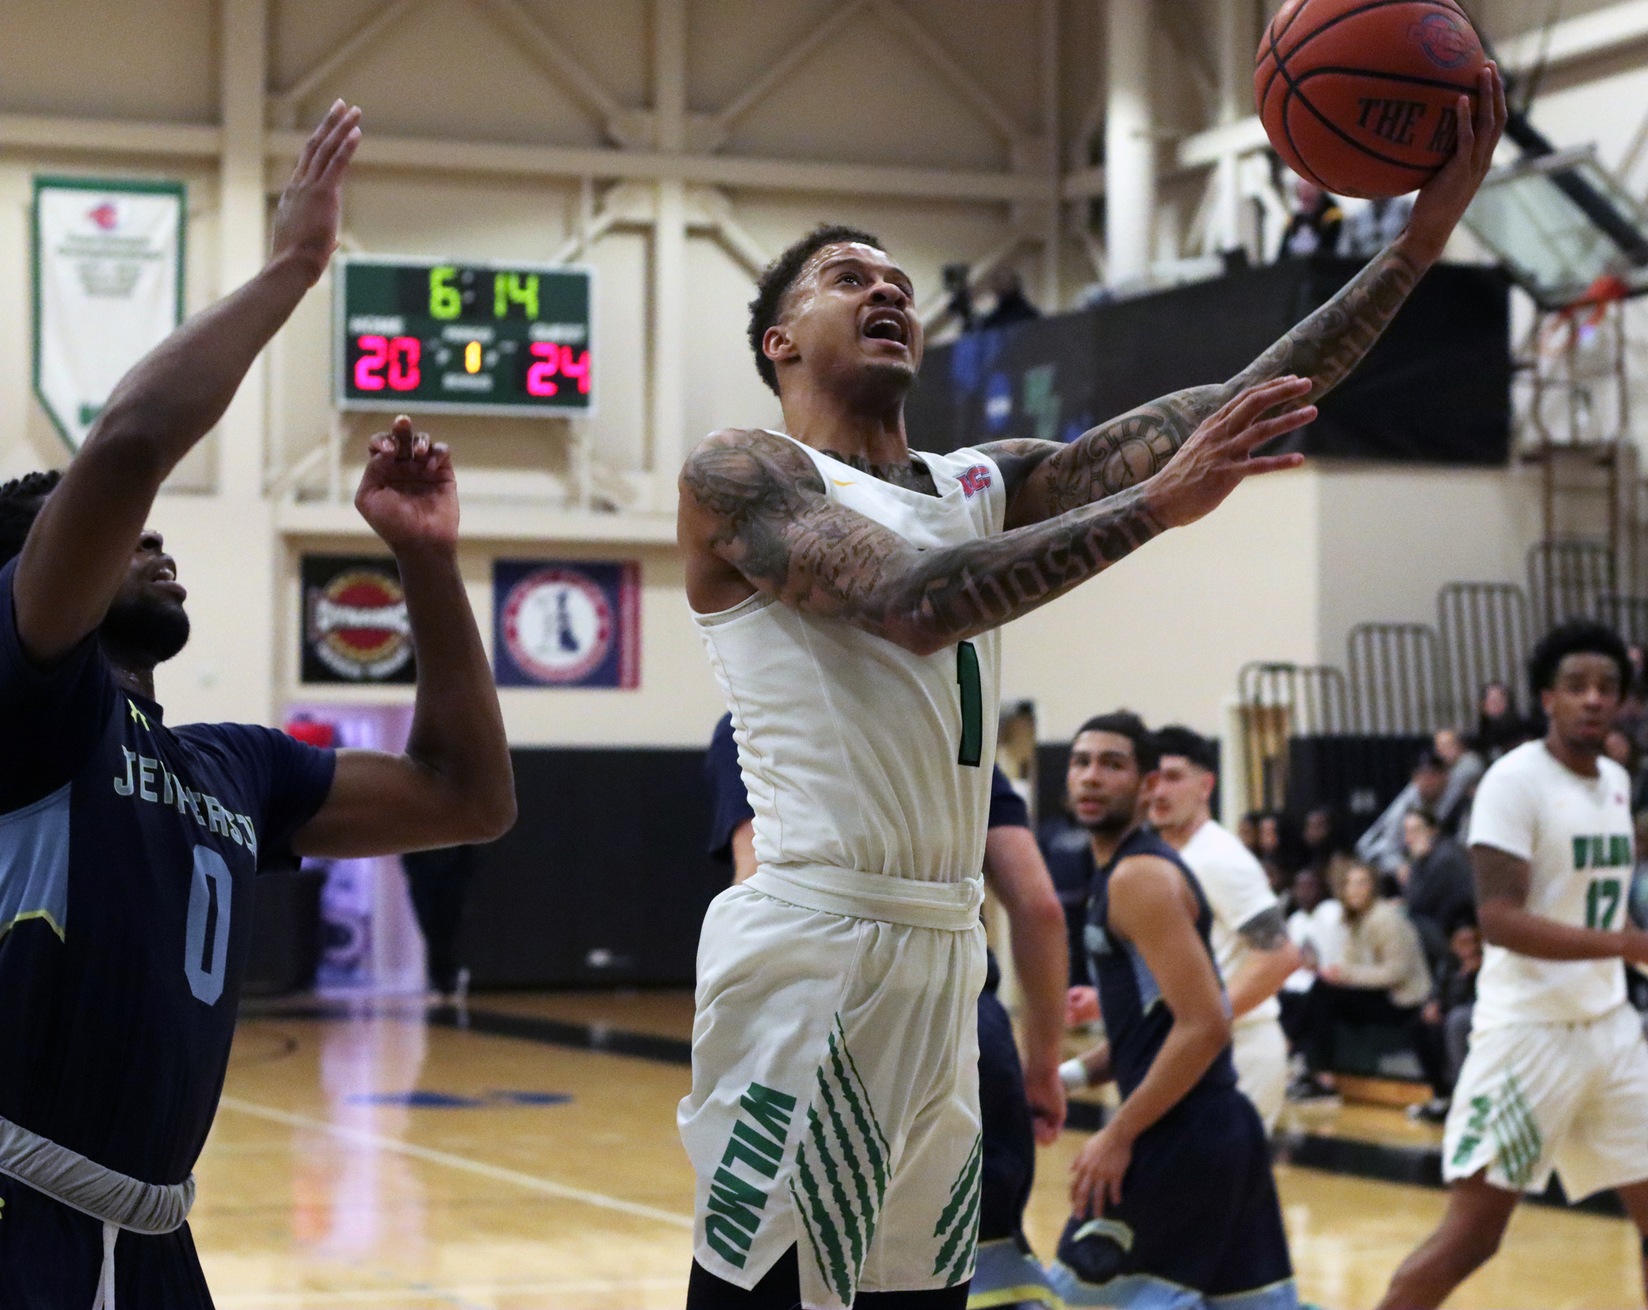 Photo of Jermaine Head who scored 20 points, 8 rebounds, and 7 assists, becoming the all-time leader in assists at WilmU on Wednesday night. Copyright 2020; Wilmington University. All rights reserved. Photo by Laura Gil. February 12, 2020 vs. #10/11 Jefferson.